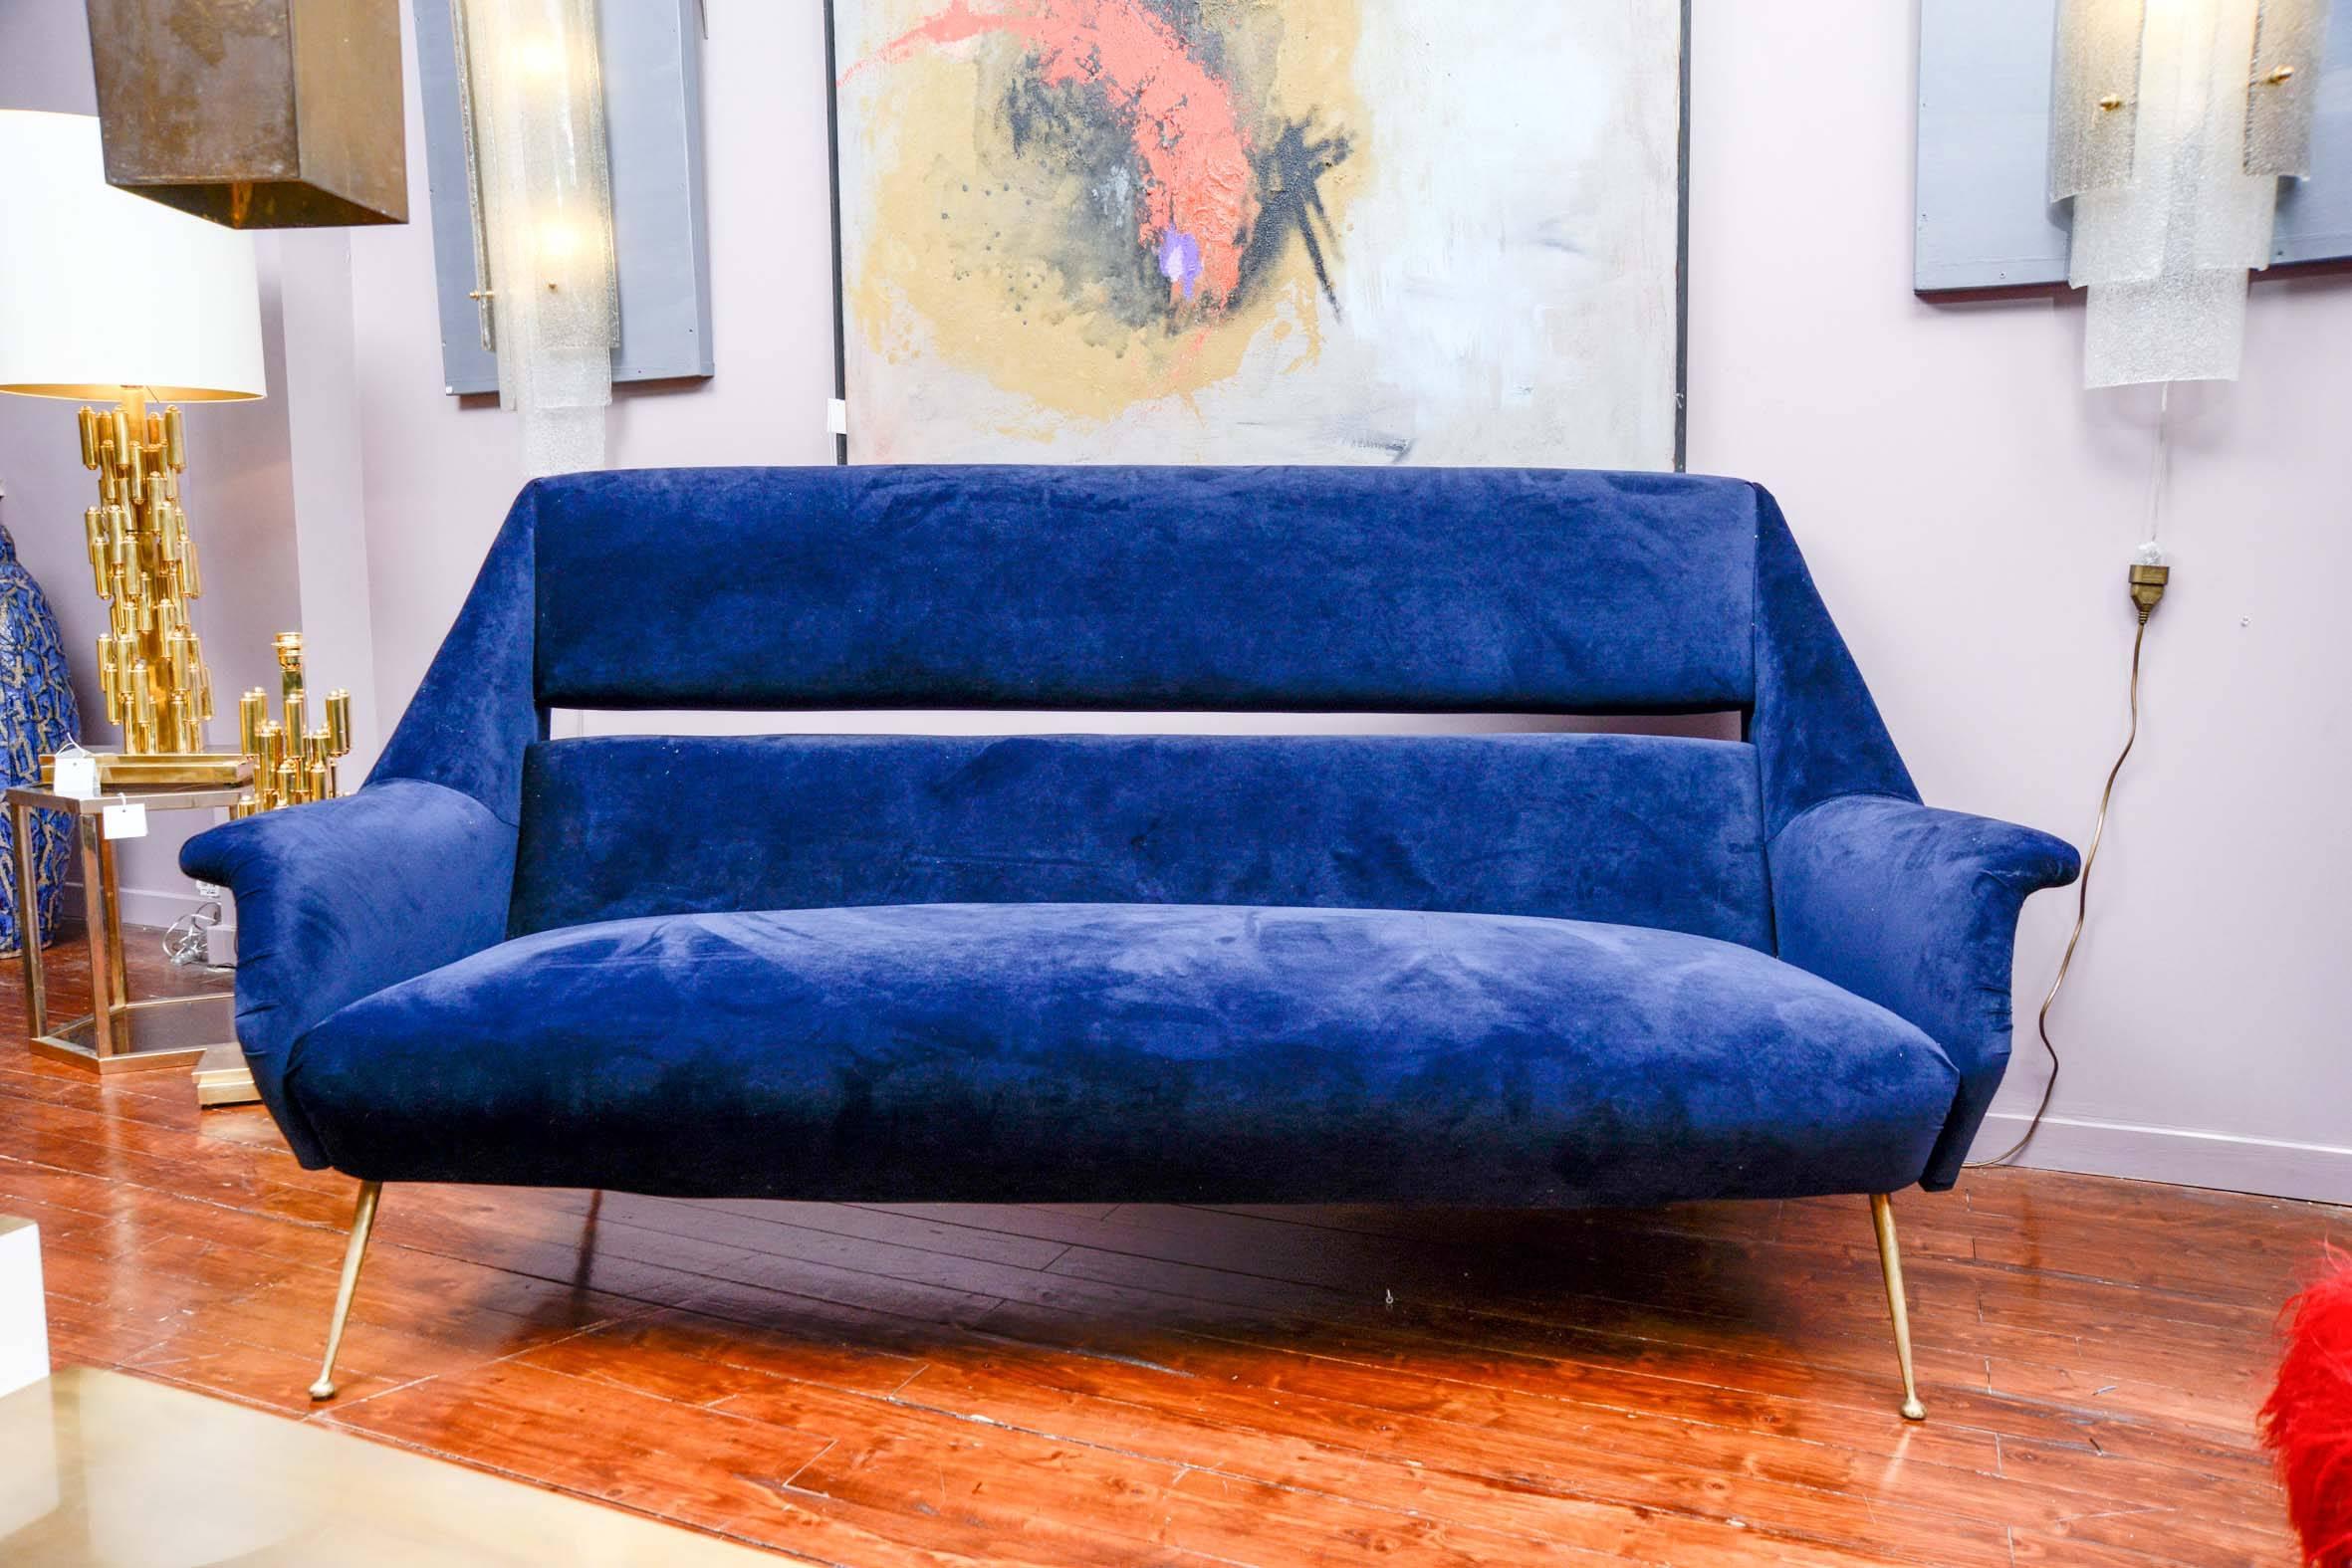 One salon suite including two armchairs and one sofa, metal legs, totally restored, upholstering with blue velvet.
Dimensions sofa: 190 x 73 x H 93 cm, seating 40 cm.
Dimensions armchairs: 85 x 73 x H 93 cm, seating 40 cm.